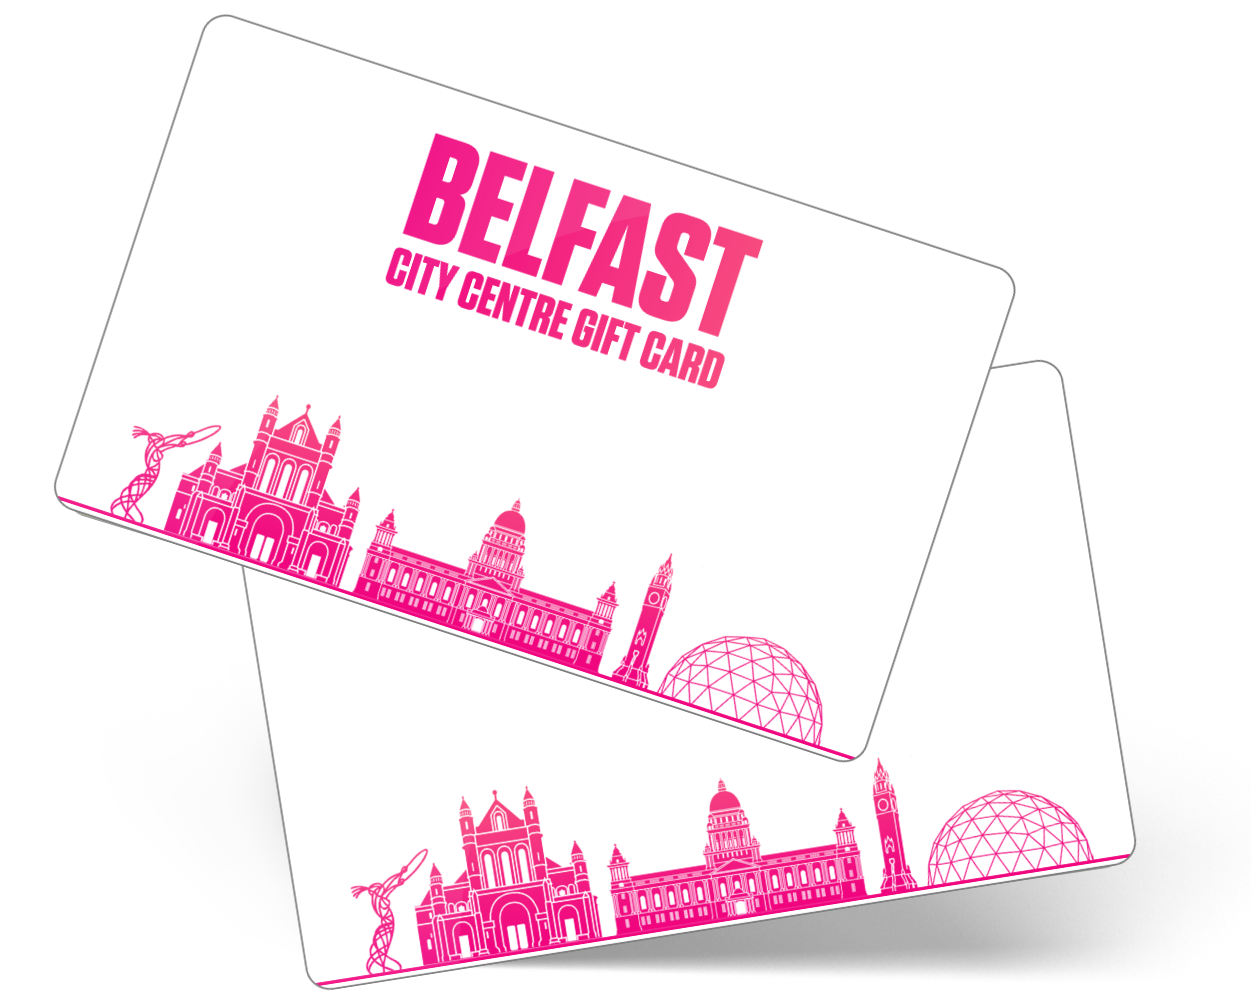 Belfast Gift Card | Town & City Gift Cards UK